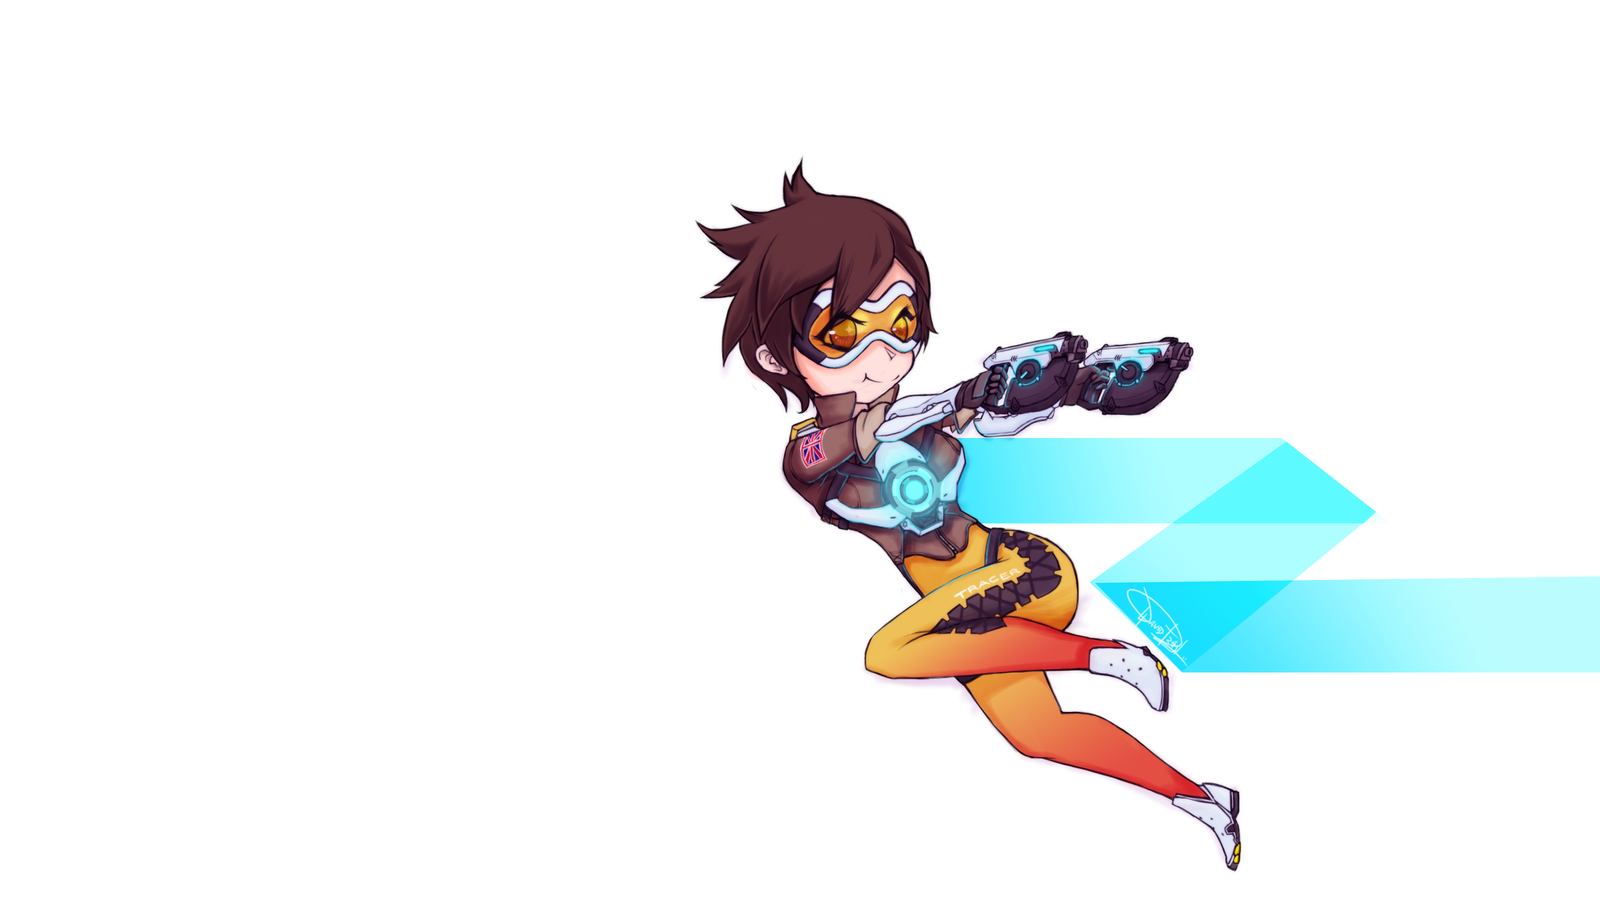 Overwatch   Tracer by Dai kunn on